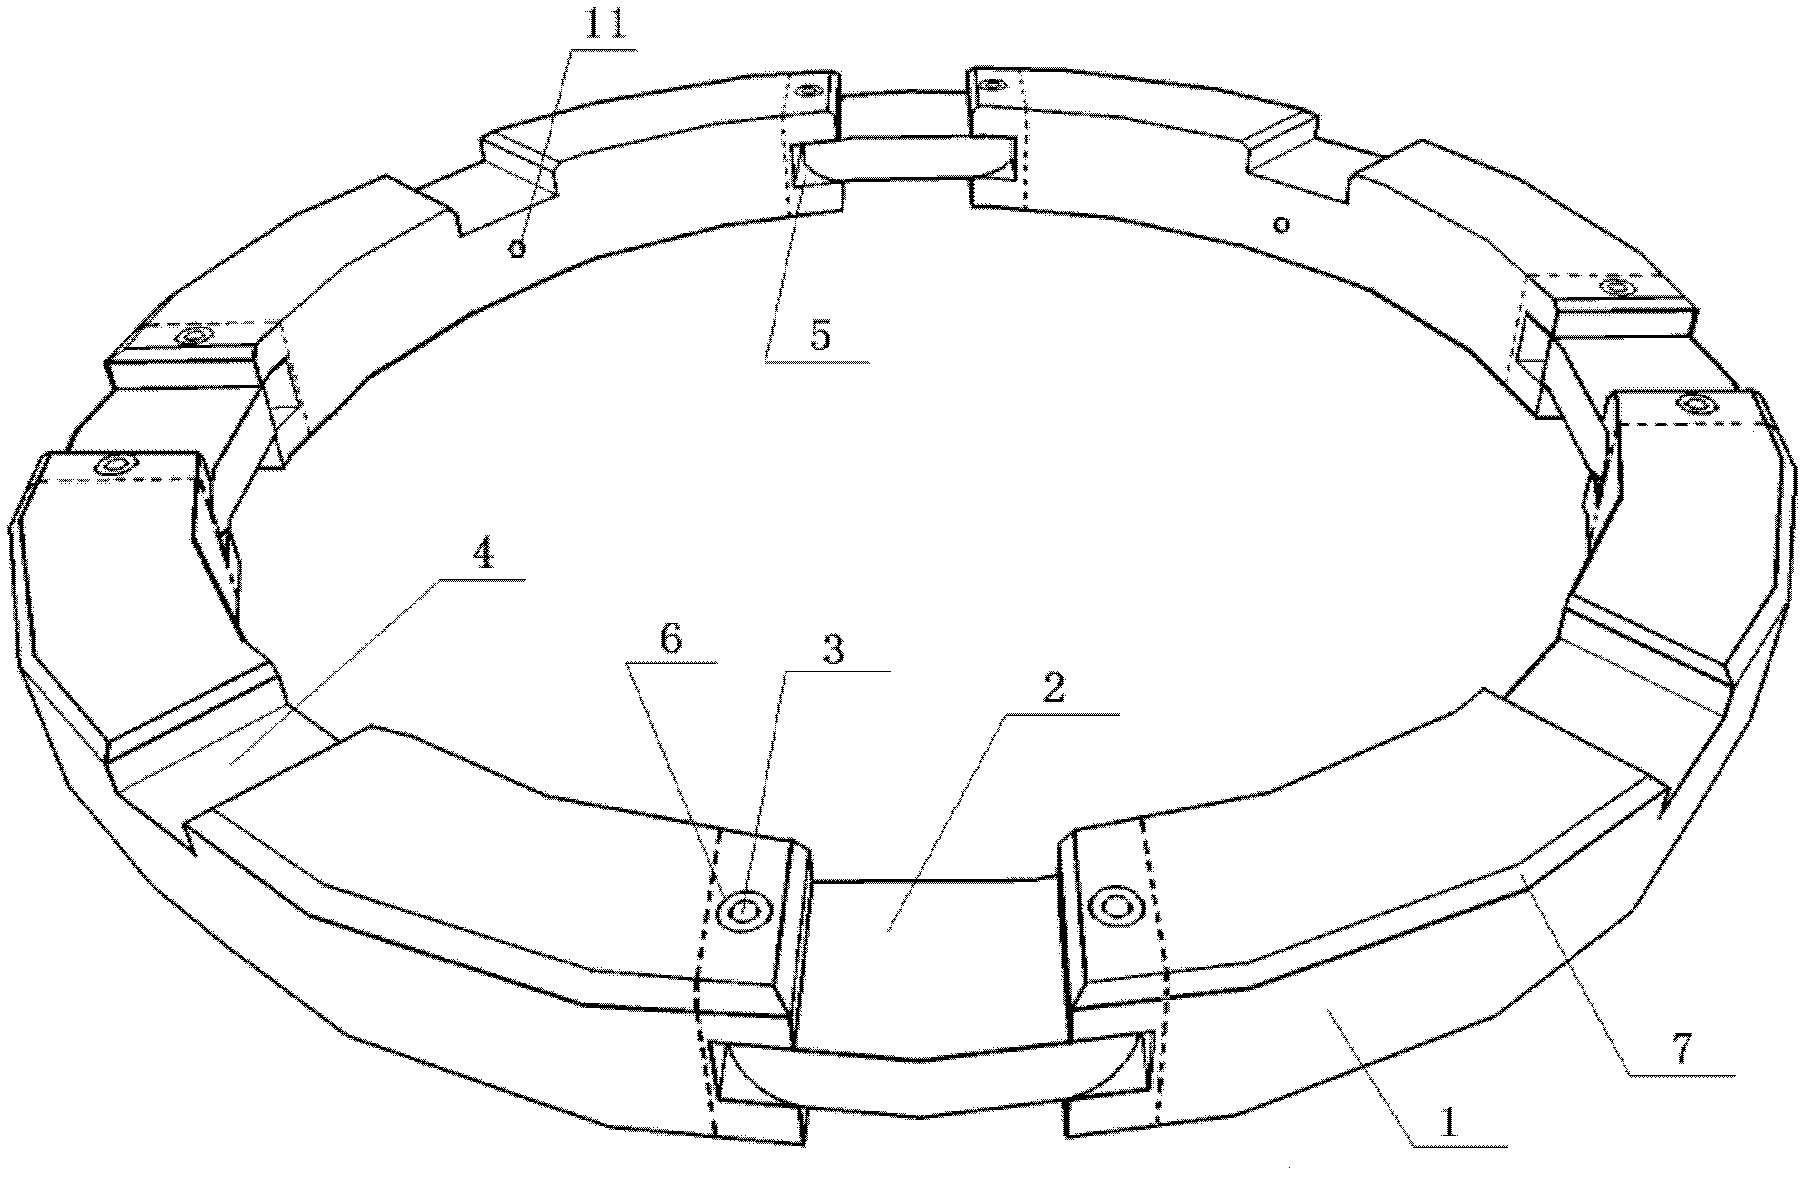 Discontinuous deformable surgical anastomosing magnetic ring